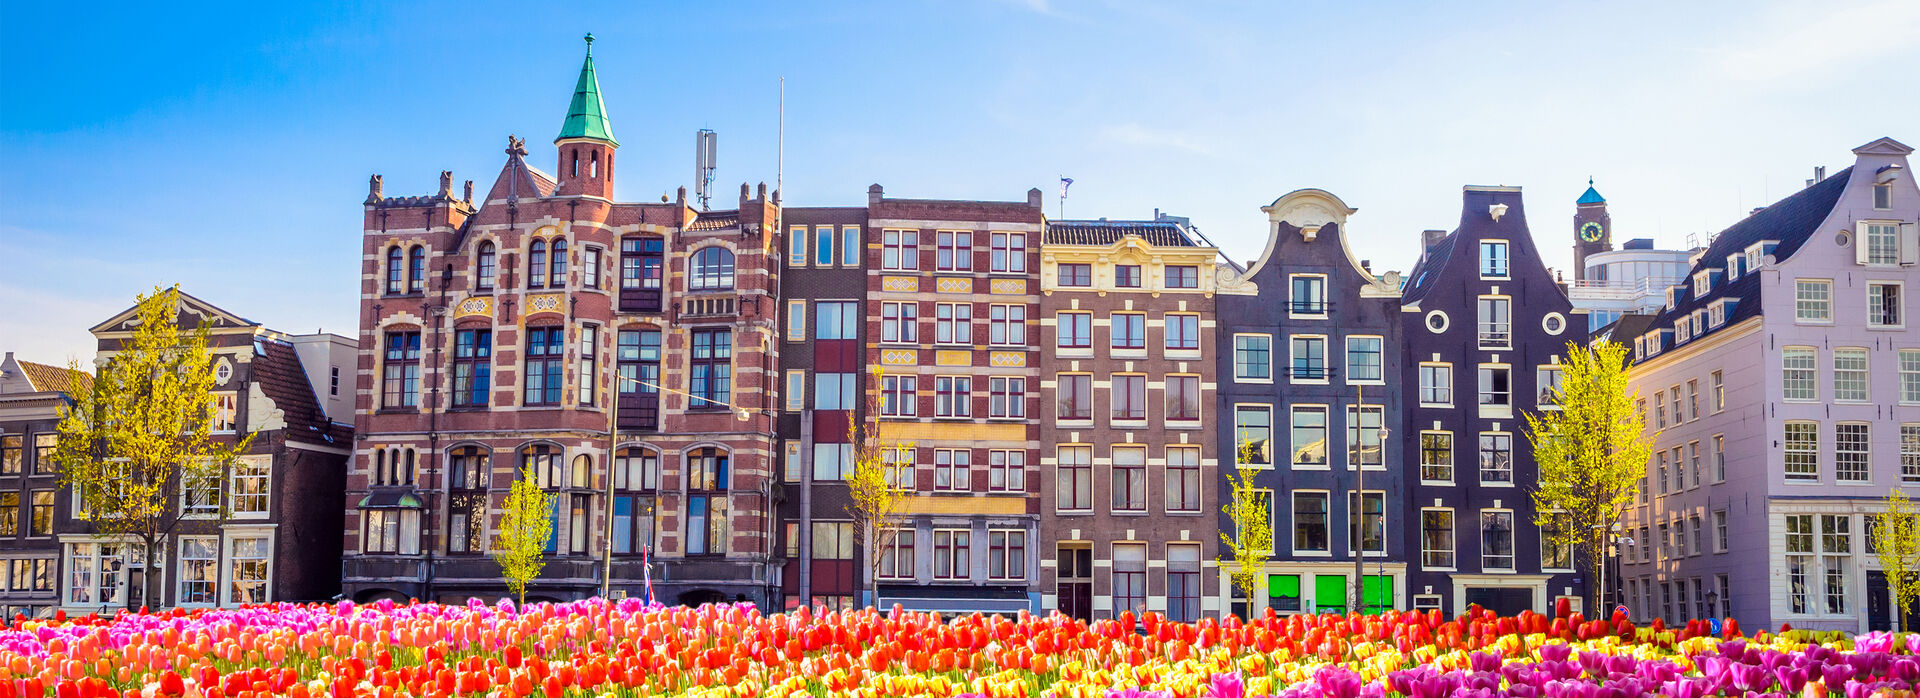 Amsterdam buildings with tulips in foreground